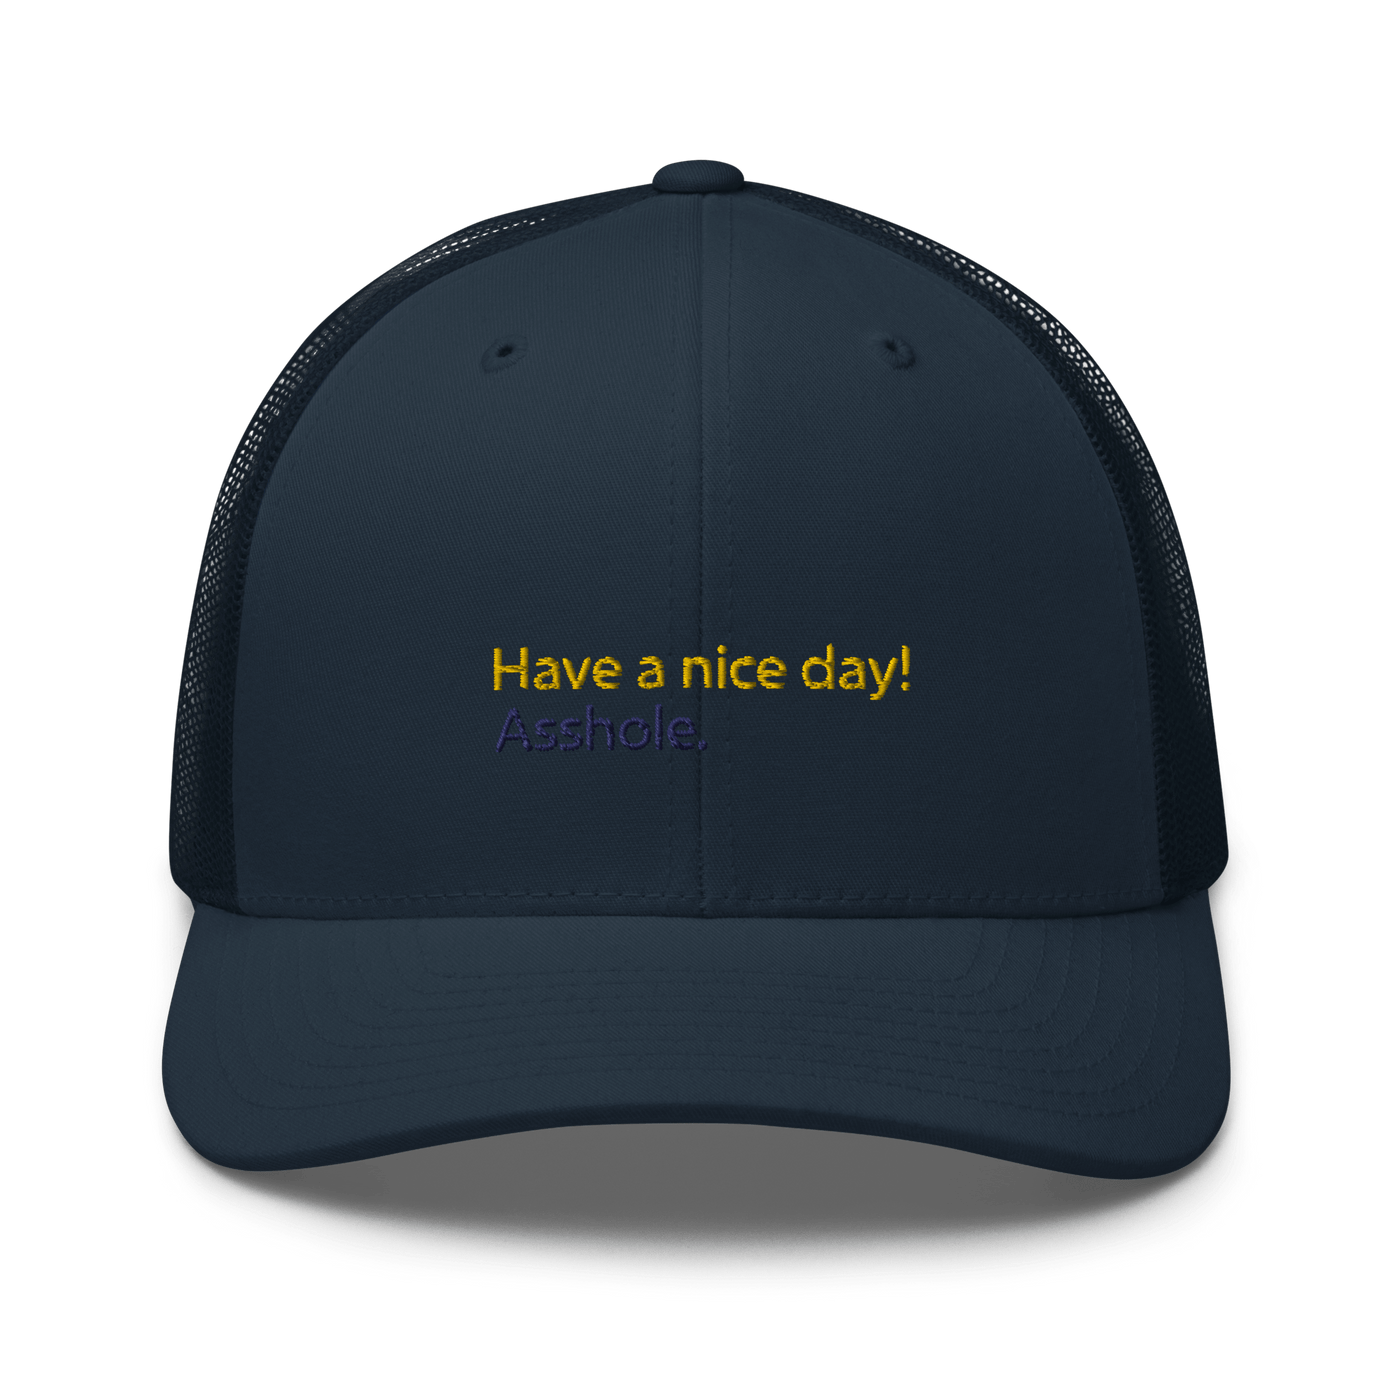 Have a nice day! (asshole) Trucker Cap - Navy - - Just Another Cap Store